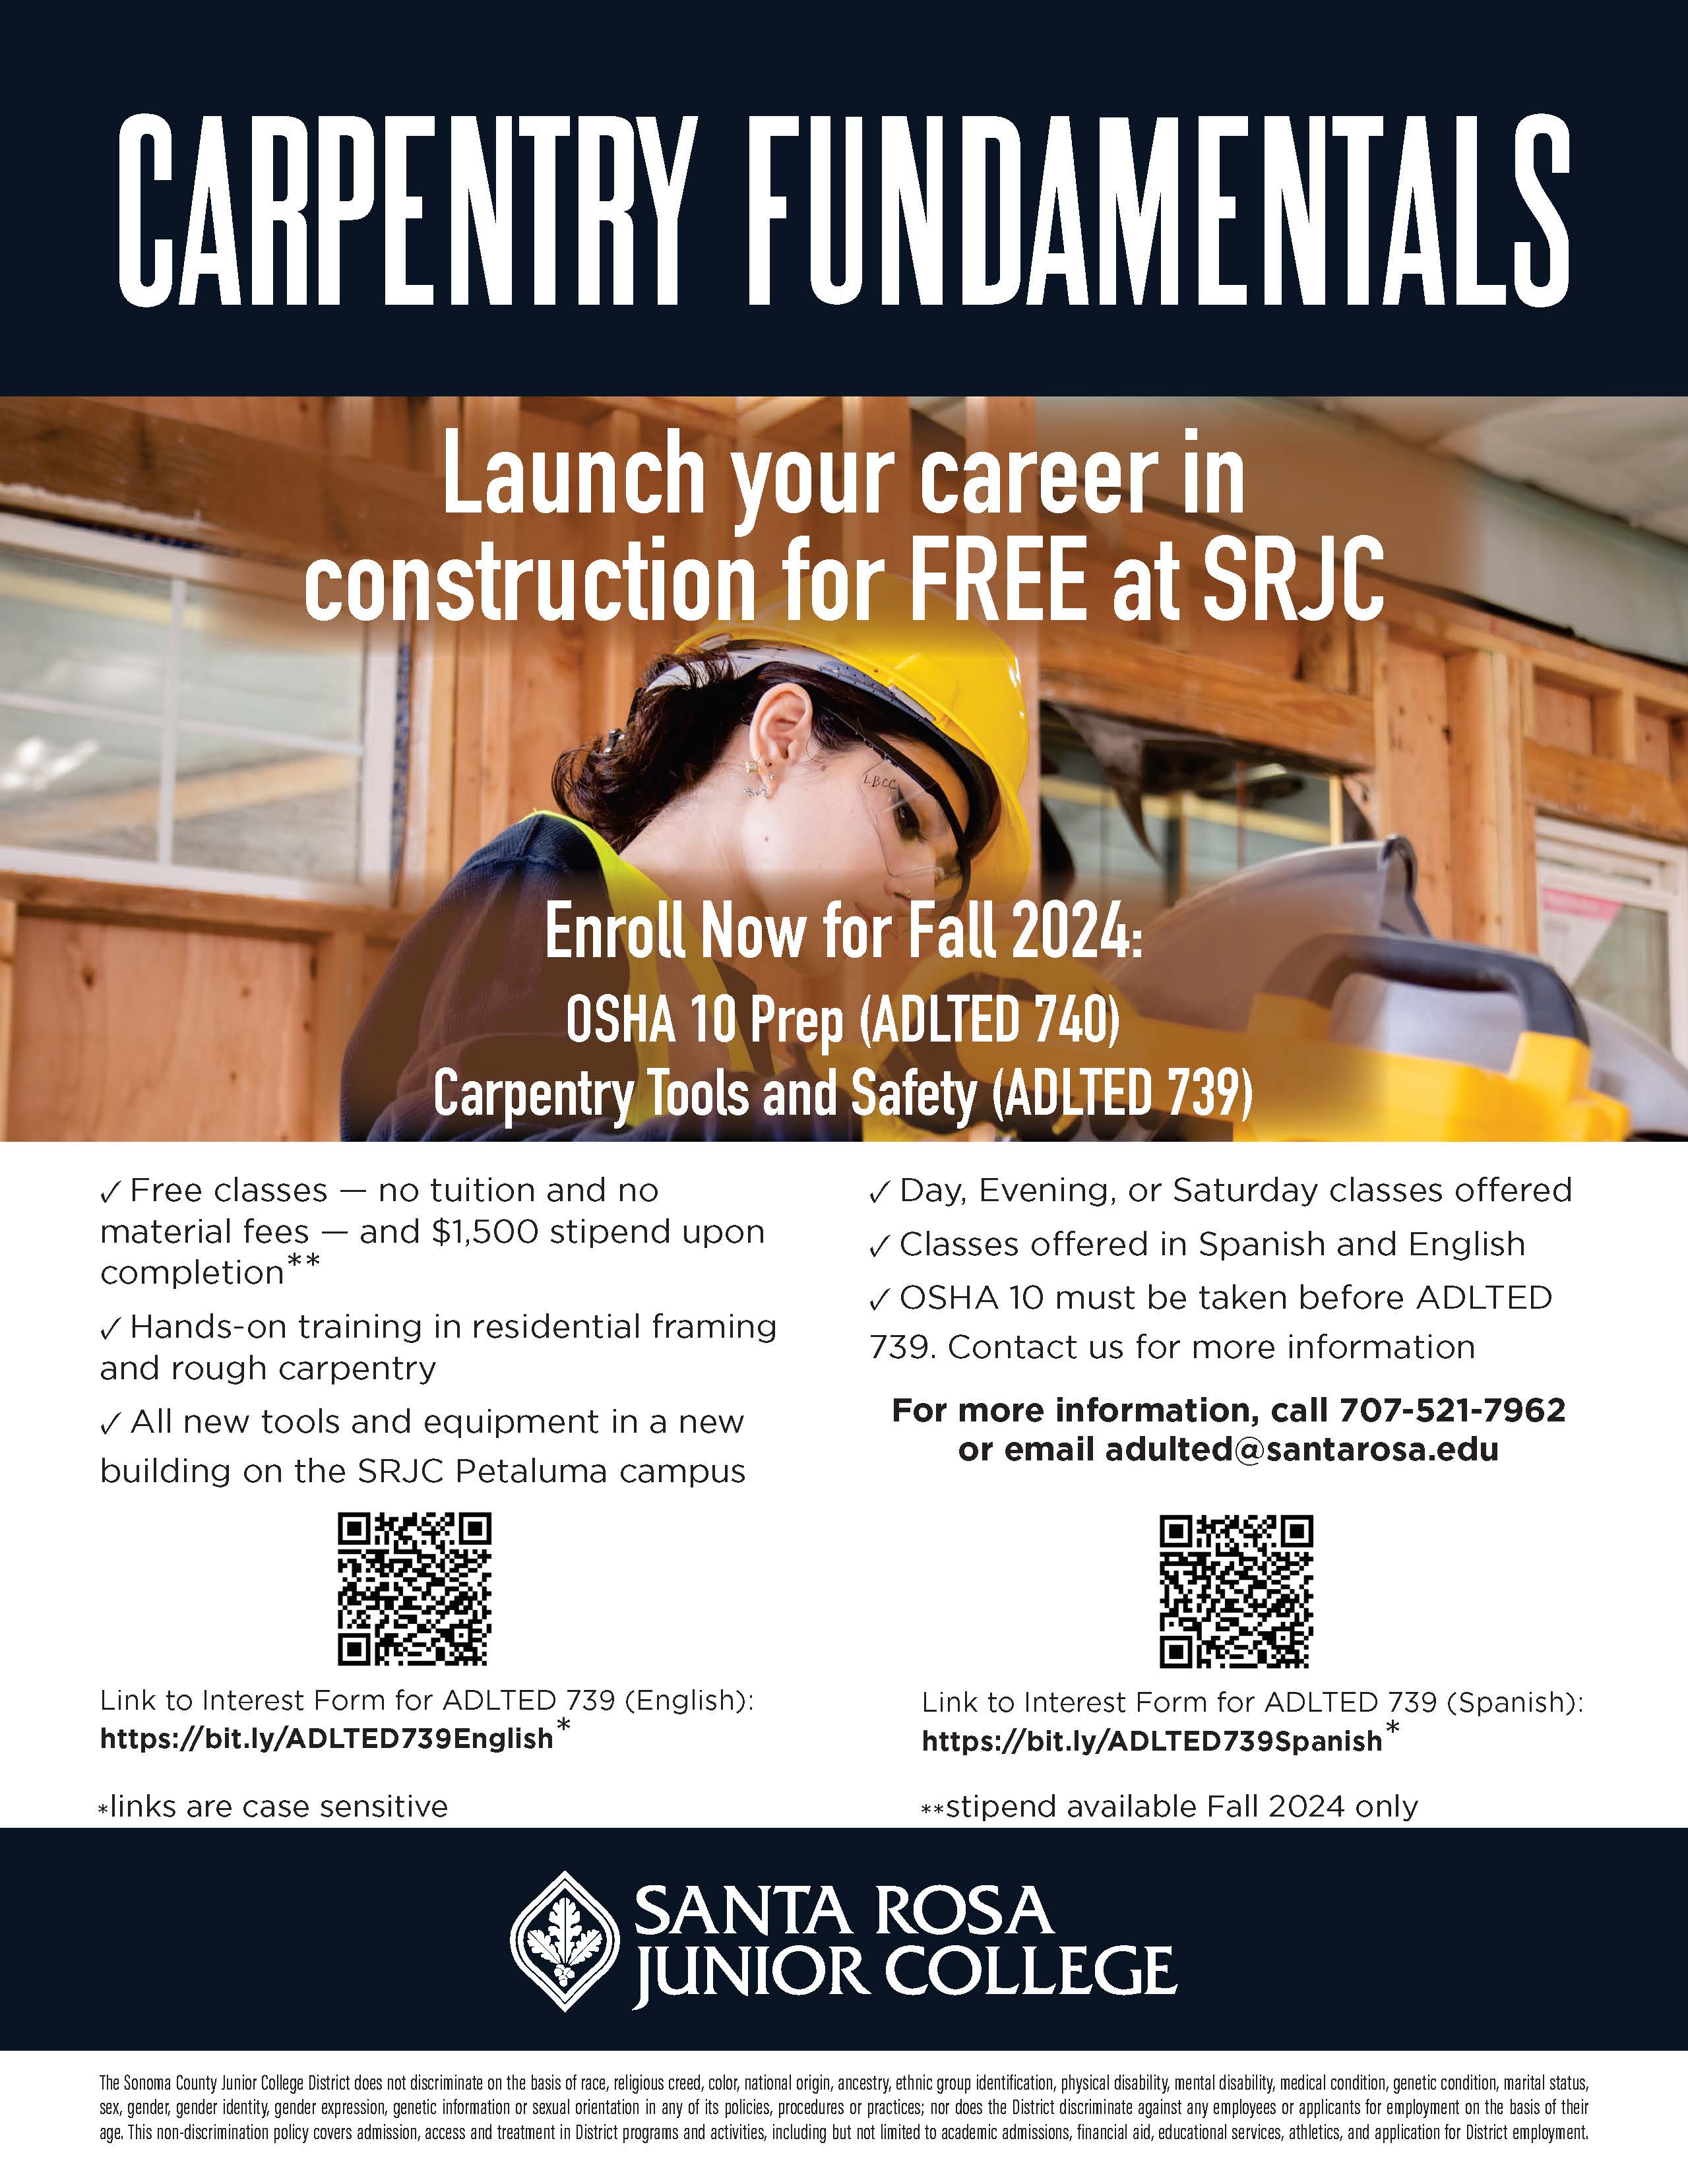 Carpentry fundamentals. Launch your career in construction for FREE at SRJC. Enroll Now for Fall 2024: OSHA 10 Prep (ADLTED 740) Carpentry Tools and Safety (ADLTED 739). ✓ Free classes — no tuition and no material fees — and $1,500 stipend upon completion** ✓ Hands-on training in residential framing and rough carpentry ✓ All new tools and equipment in a new building on the SRJC Petaluma campus ✓ Day, Evening, or Saturday classes offered ✓ Classes offered in Spanish and English ✓ OSHA 10 must be taken before ADLTED 739. Contact us for more information. For more information, call 707-521-7962 or email adulted@santarosa.edu Link to Interest Form for ADLTED 739 (English): https://bit.ly/ADLTED739English * Link to Interest Form for ADLTED 739 (Spanish): https://bit.ly/ADLTED739Spanish * *links are case sensitive. **stipend available Fall 2024 only